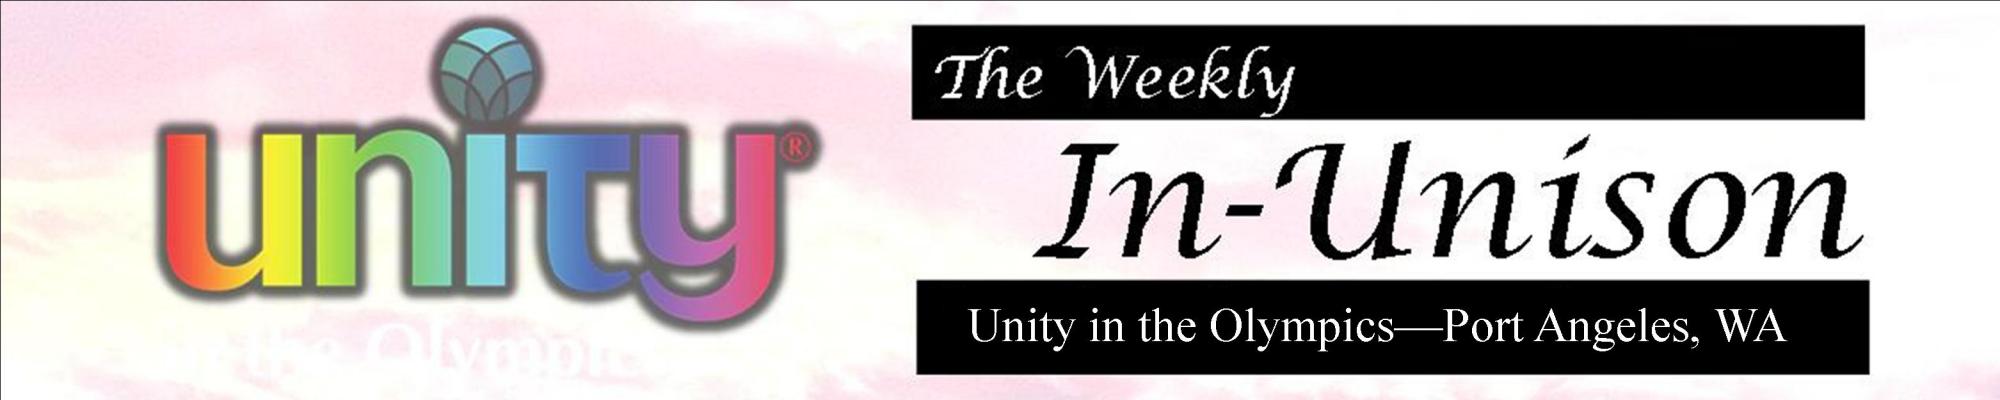 The Weekly IN-UNISON 2023 December 6th Edition